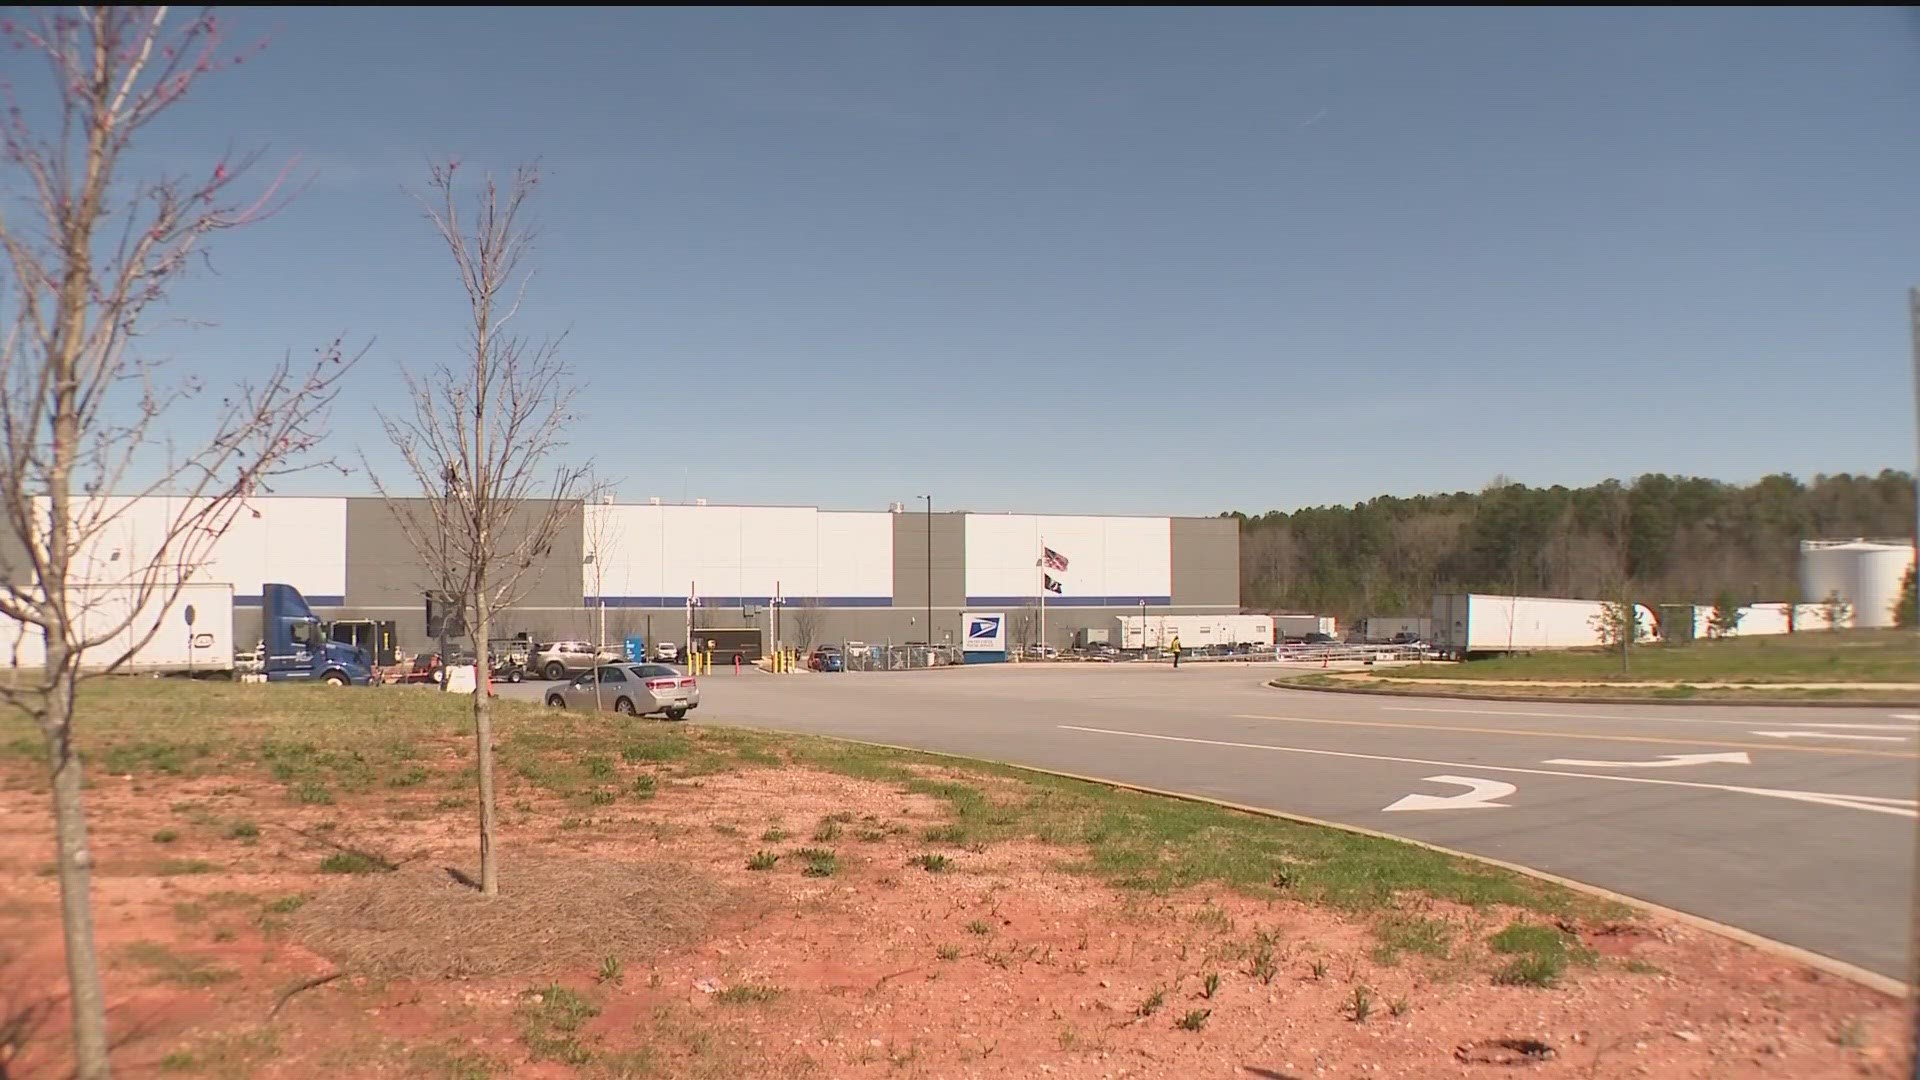 Several 11Alive viewers reached out about missing packages, paychecks, prescriptions and more as issues seem to continue at the Atlanta facility in Palmetto.